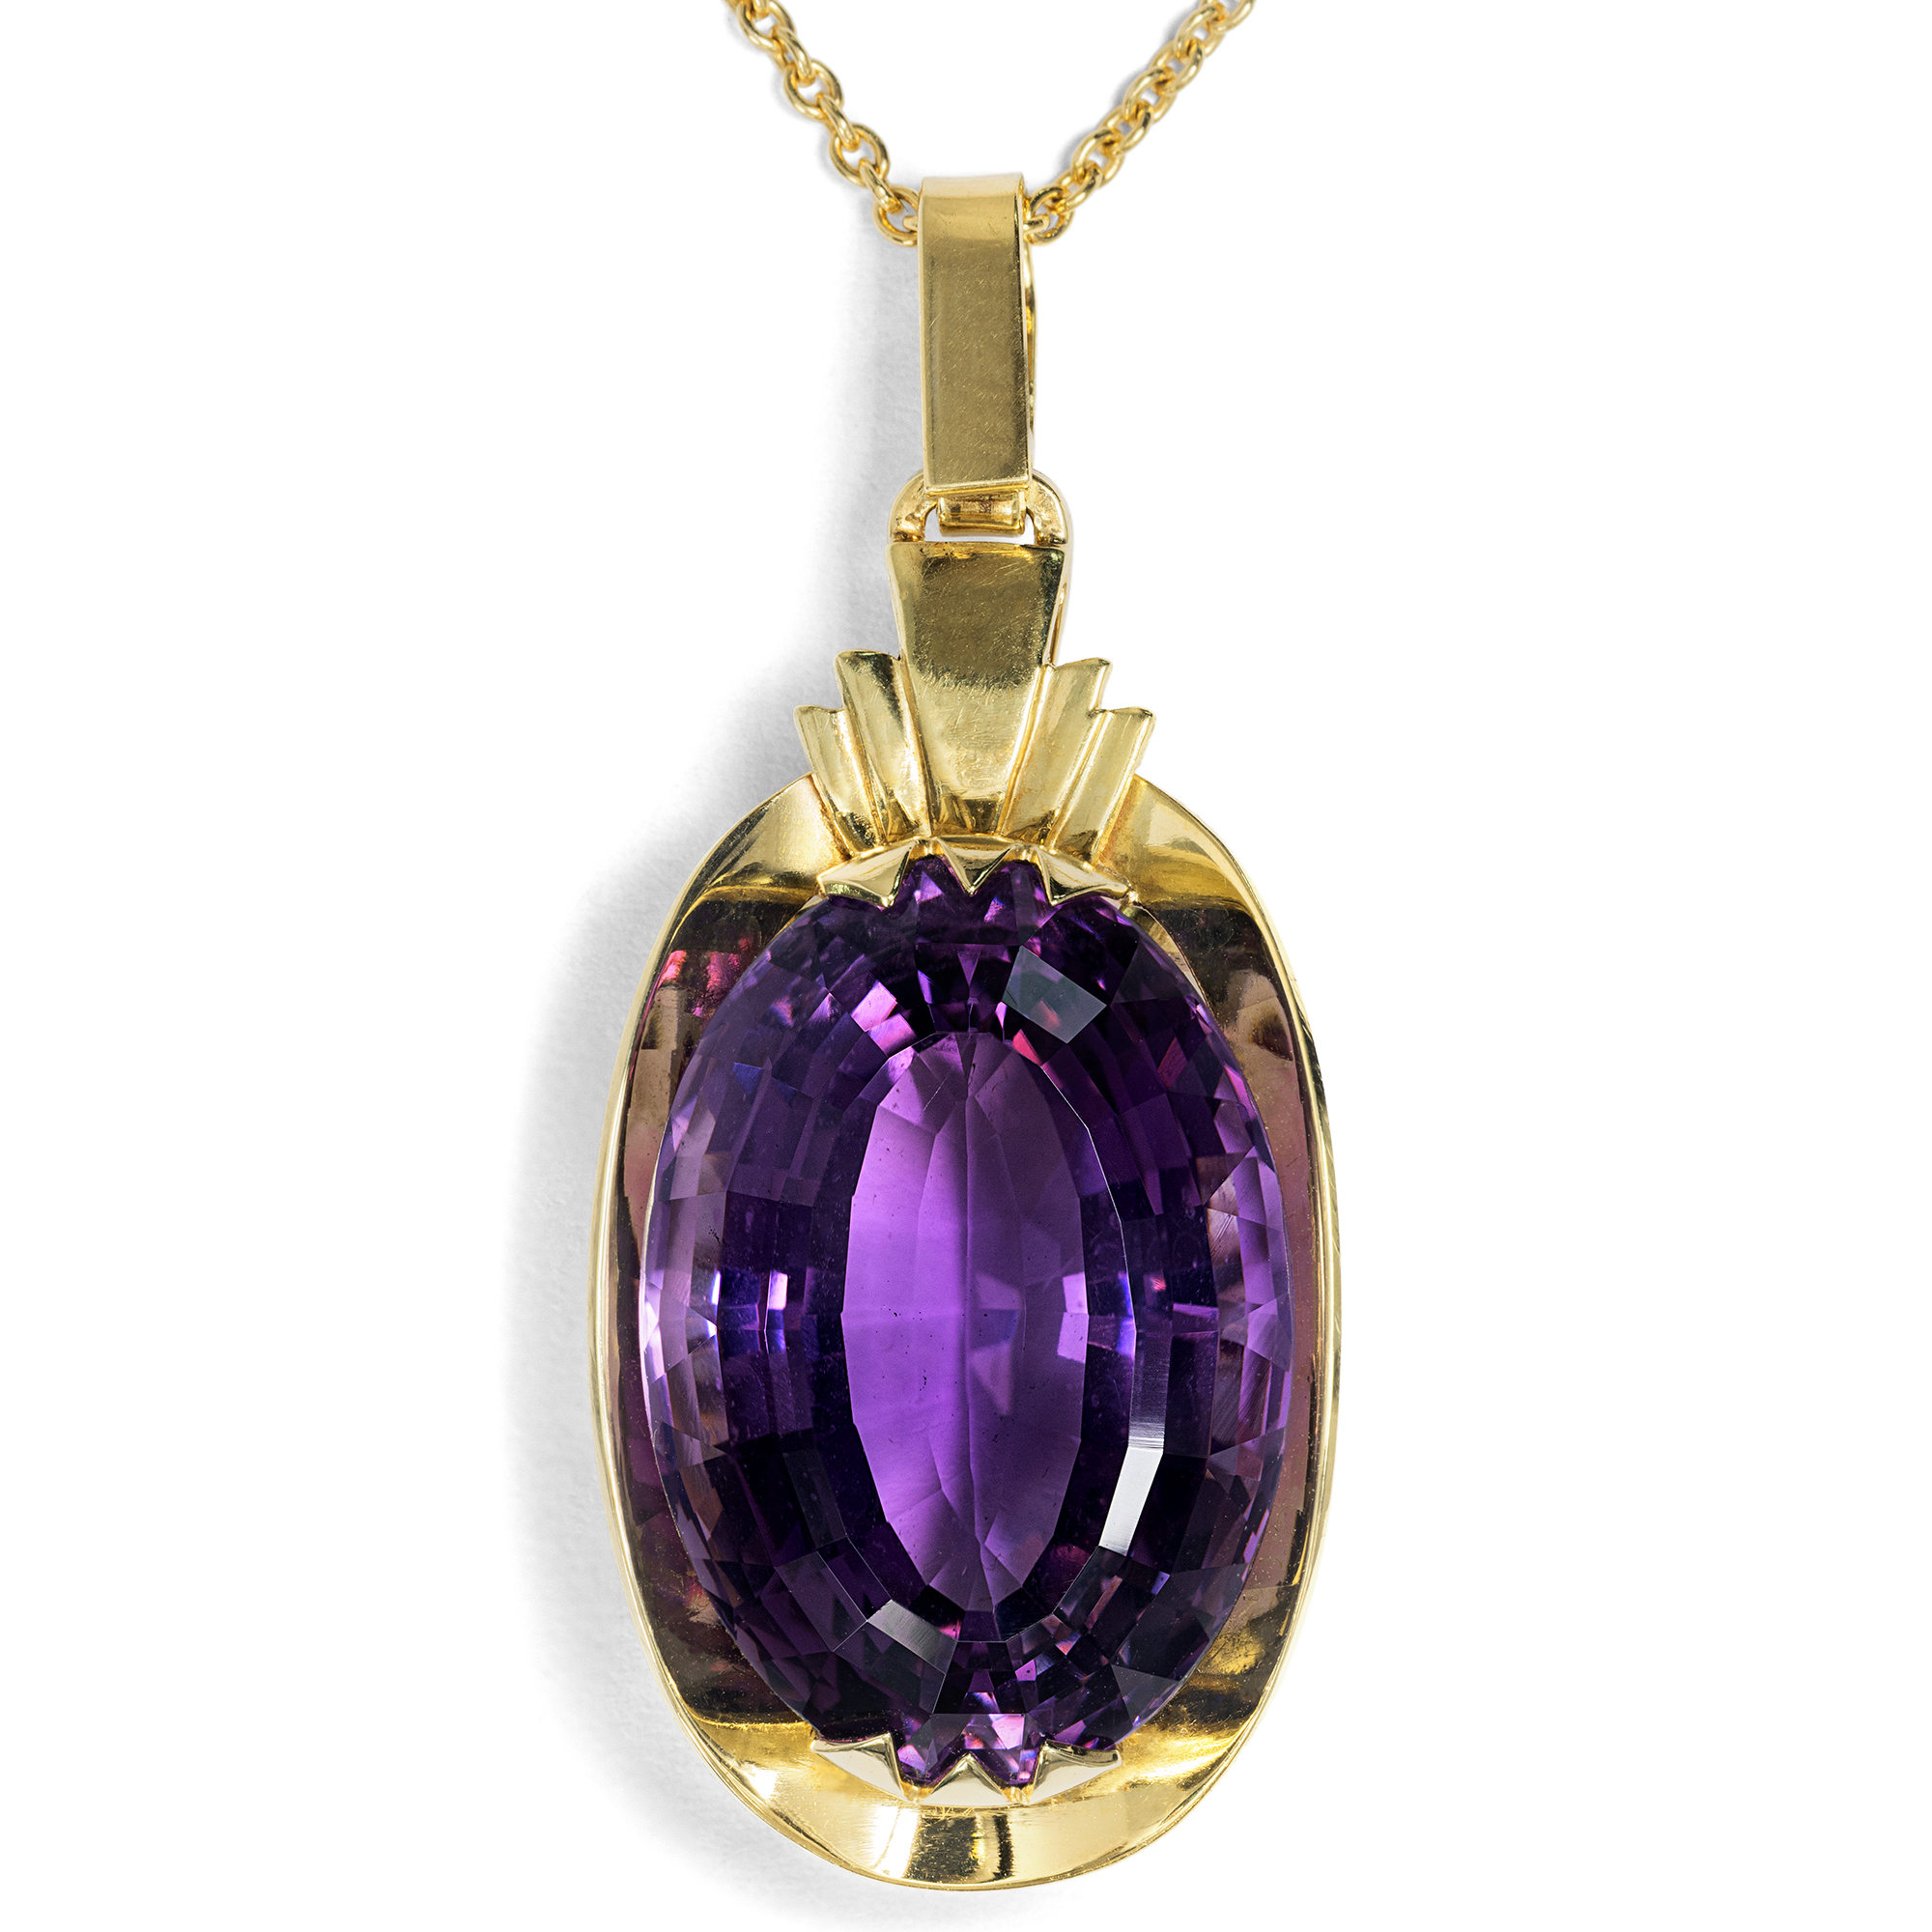 Beautiful Vintage Pendant With Amethyst in Gold on Chain, Circa 1960